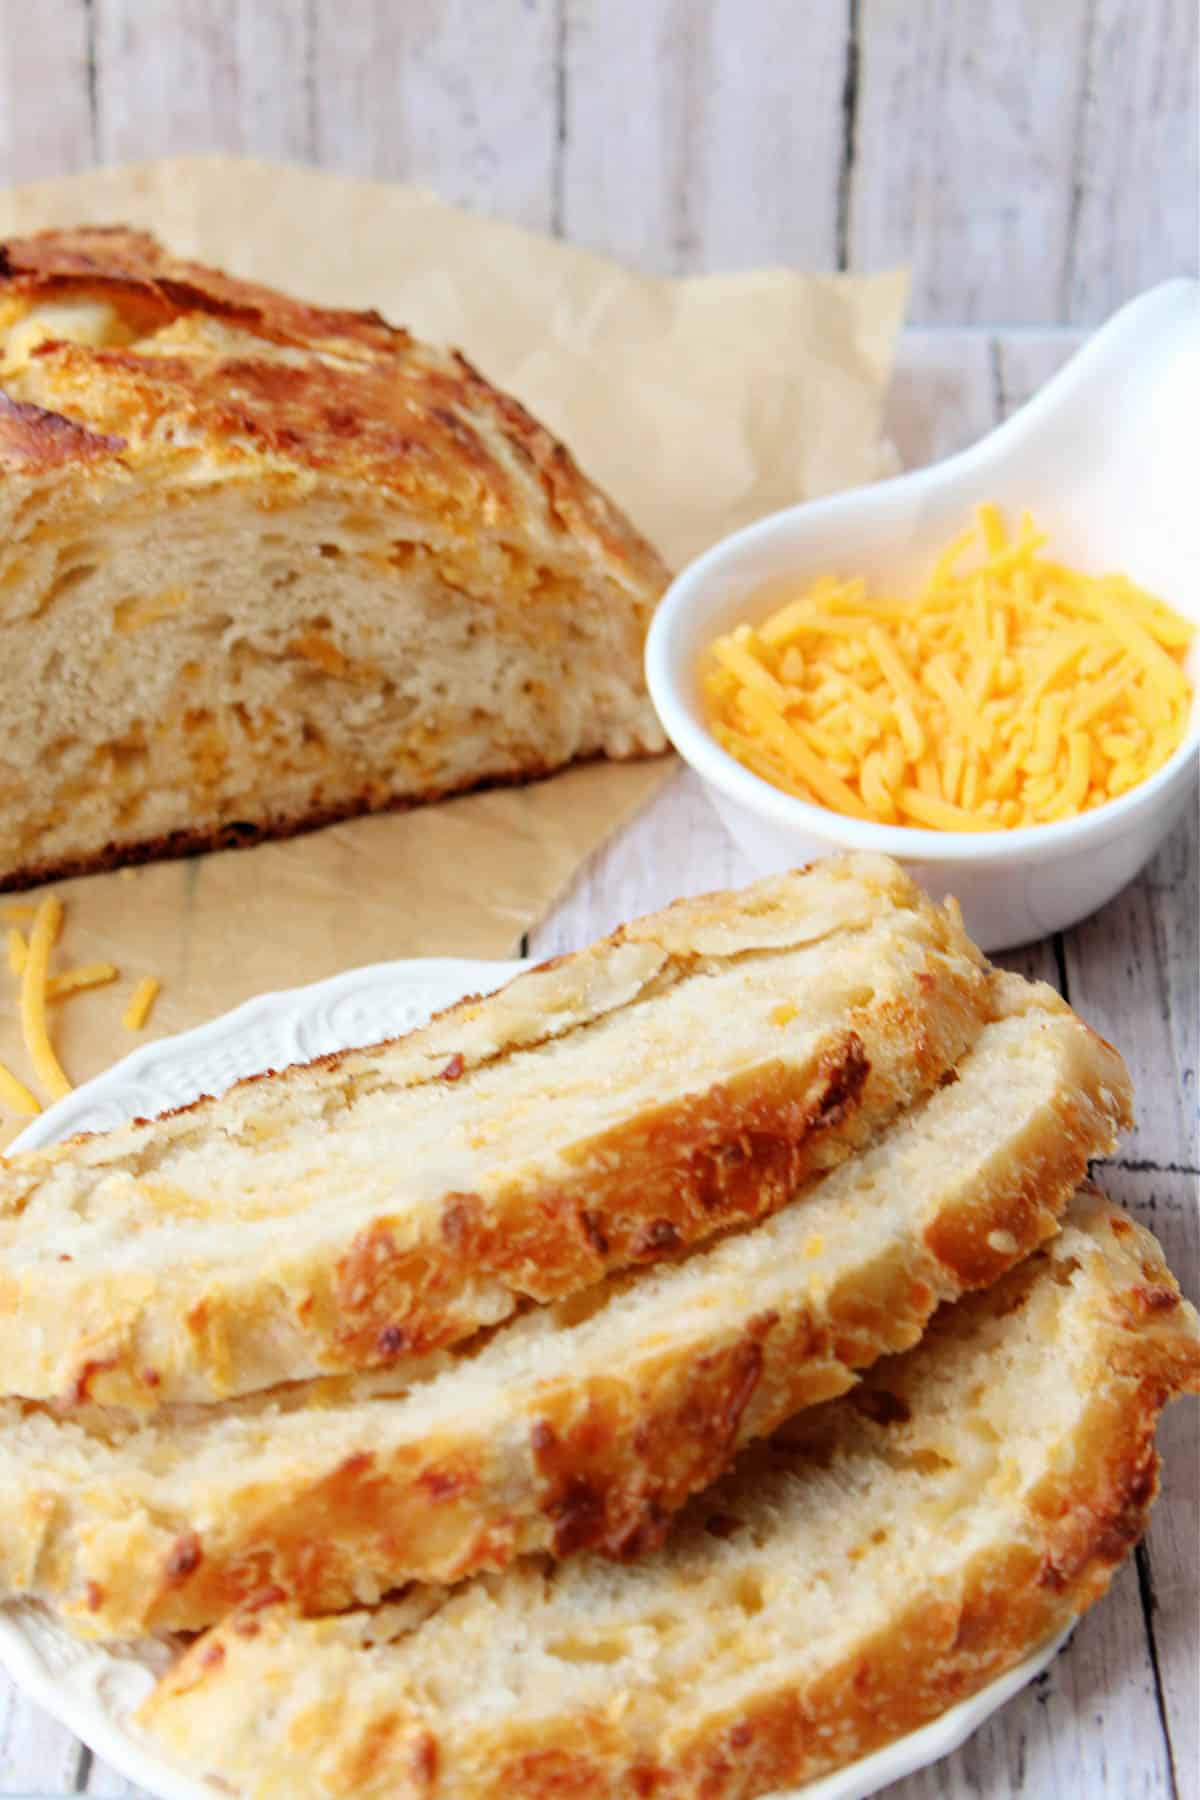 Cheddar bread partially sliced with a bowl of cheddar to the side.